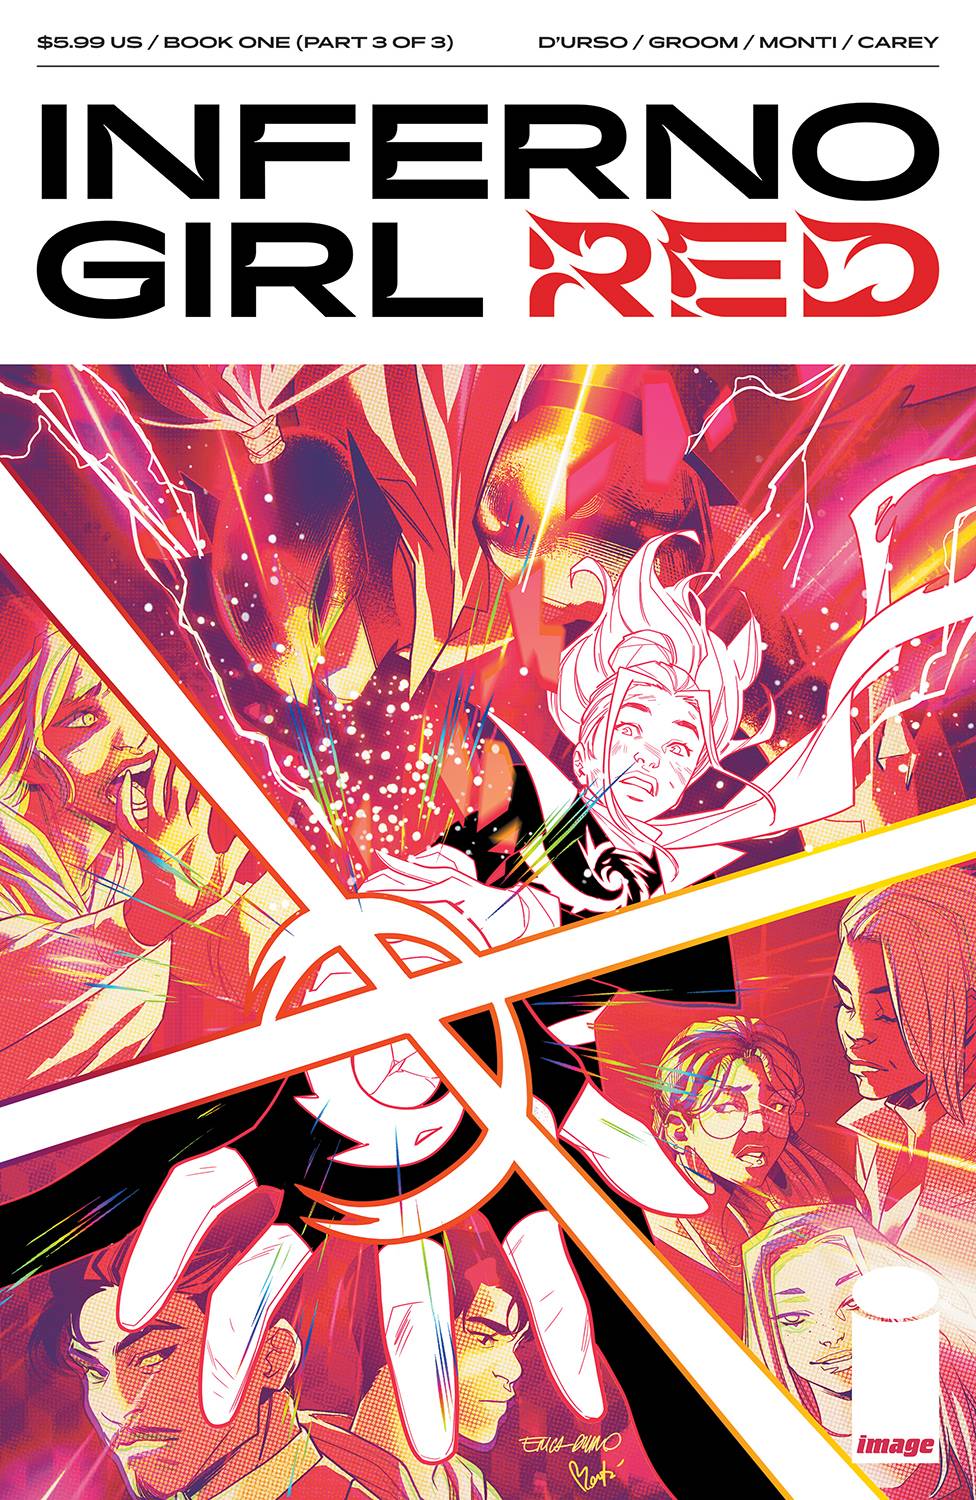 INFERNO GIRL RED BOOK ONE #3 (OF 3)